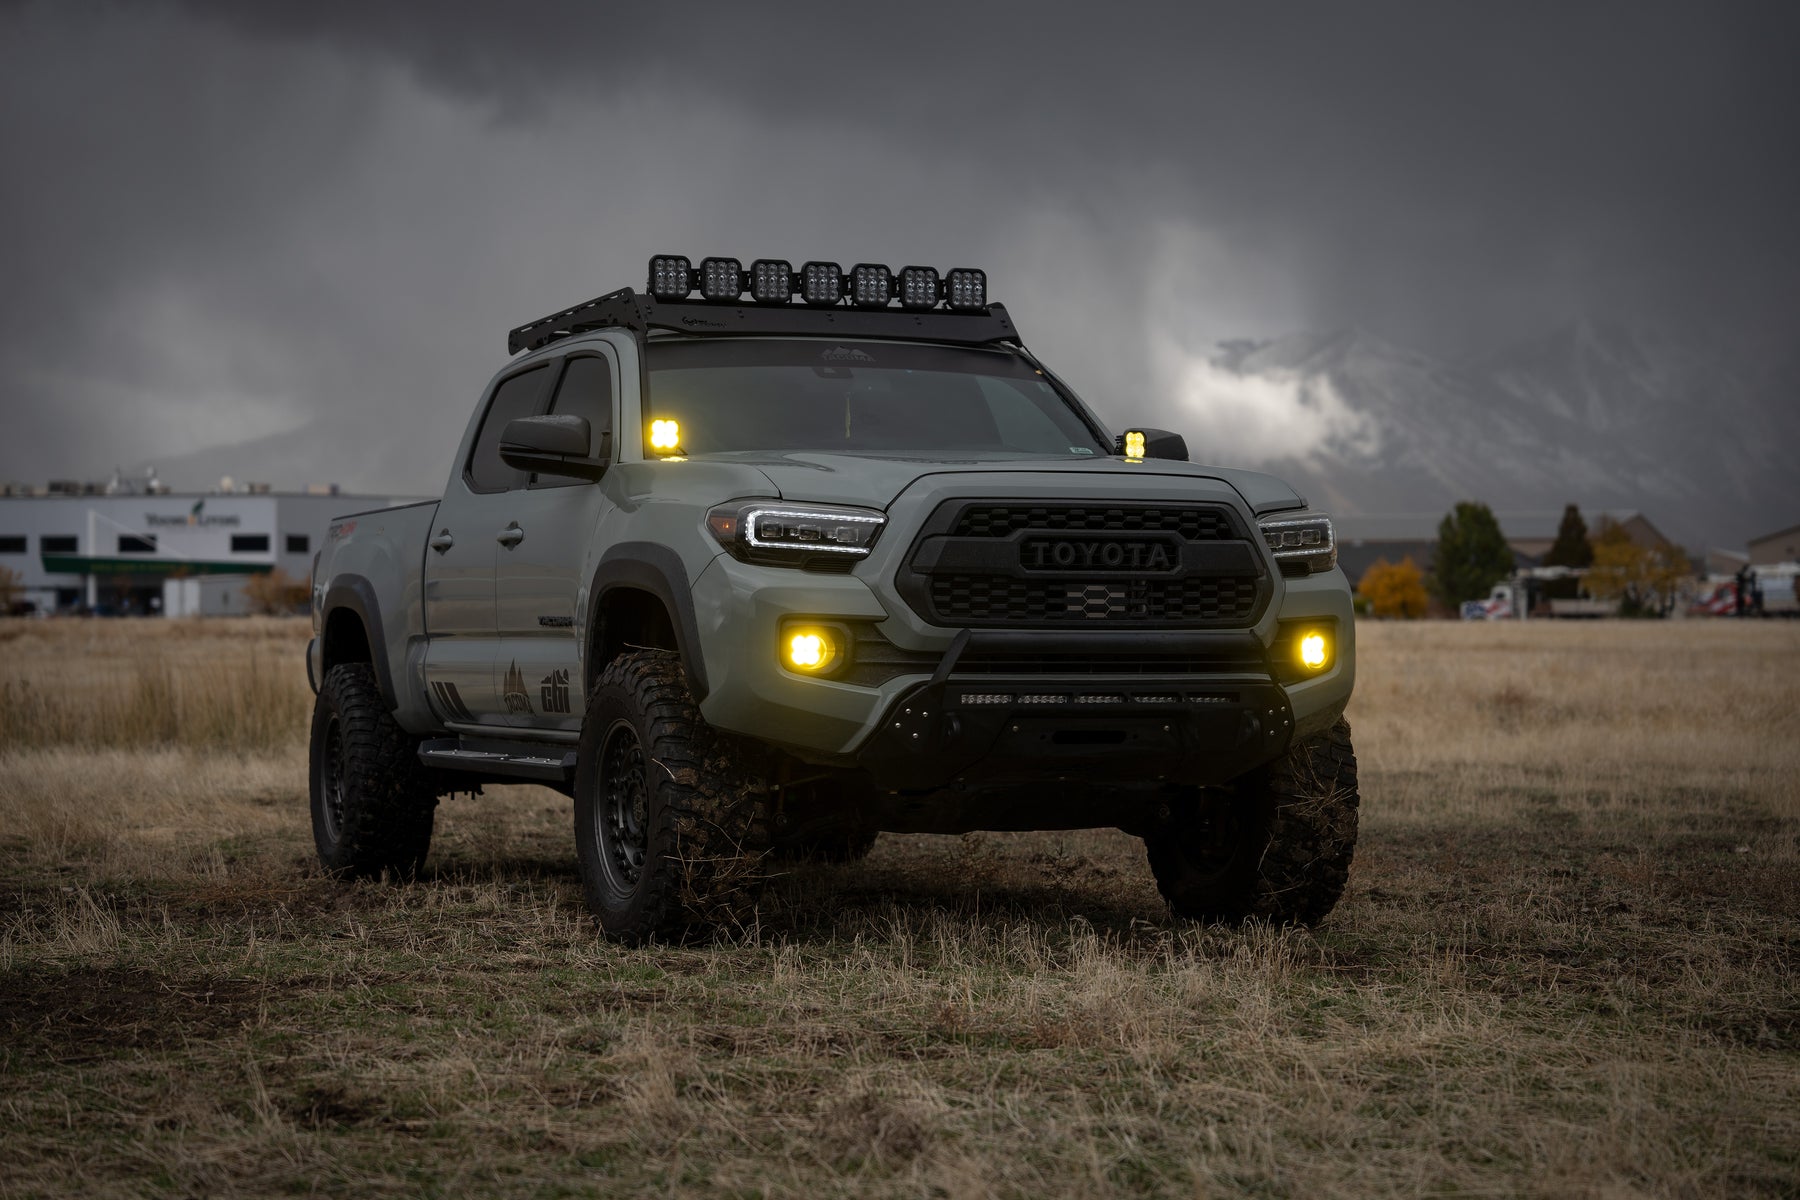 5 Mods Under $100 For Your Toyota Tacoma